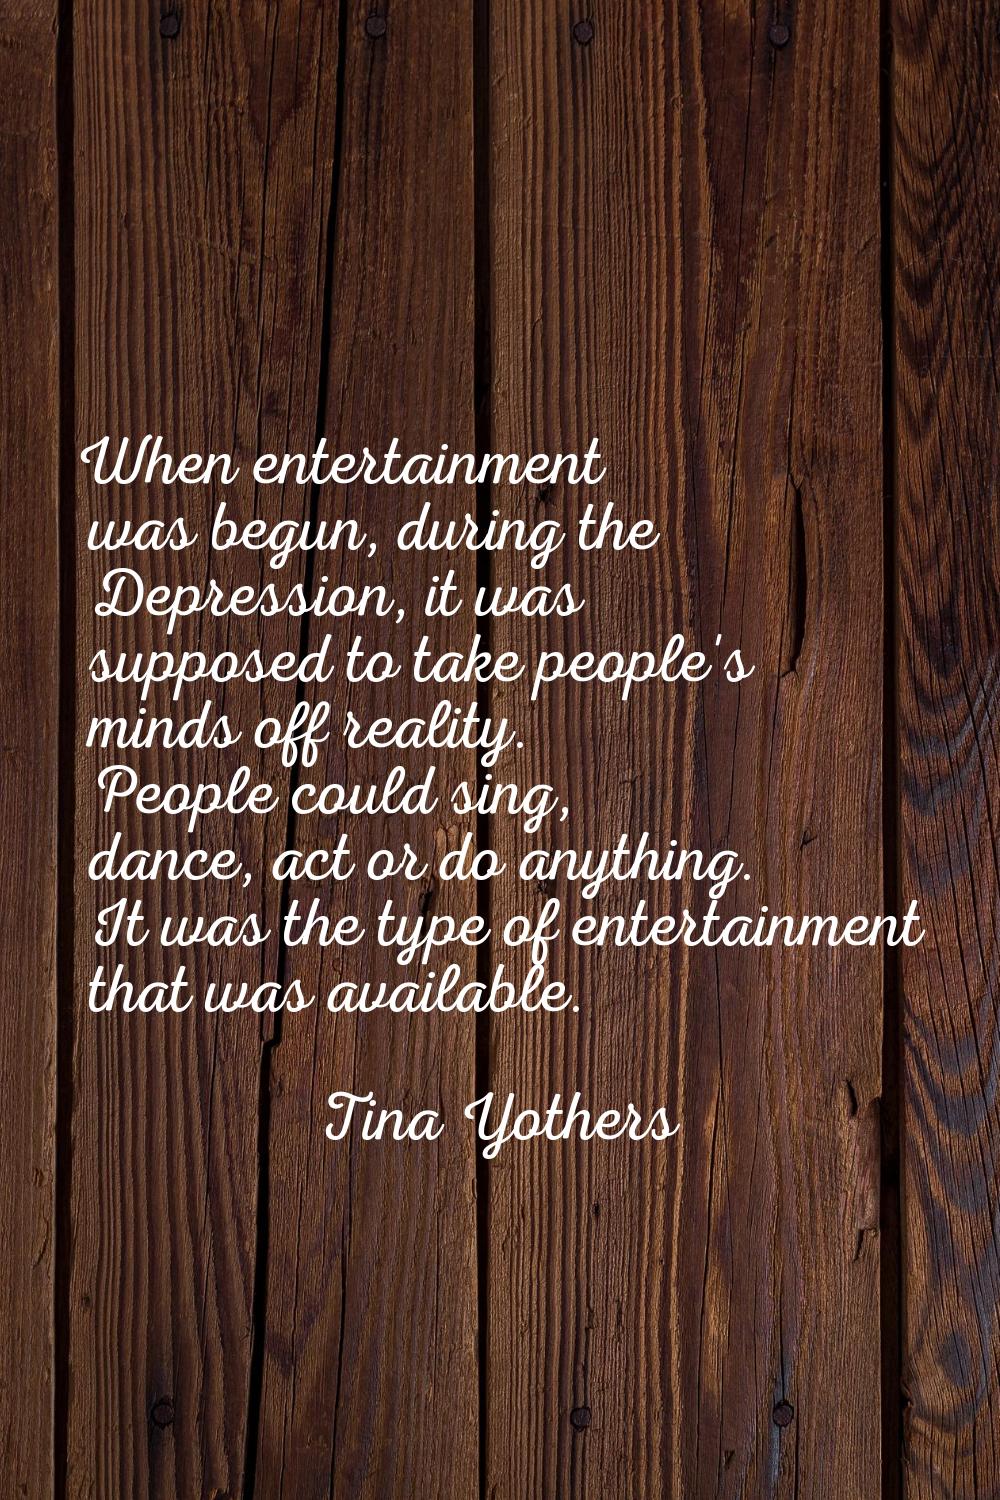 When entertainment was begun, during the Depression, it was supposed to take people's minds off rea